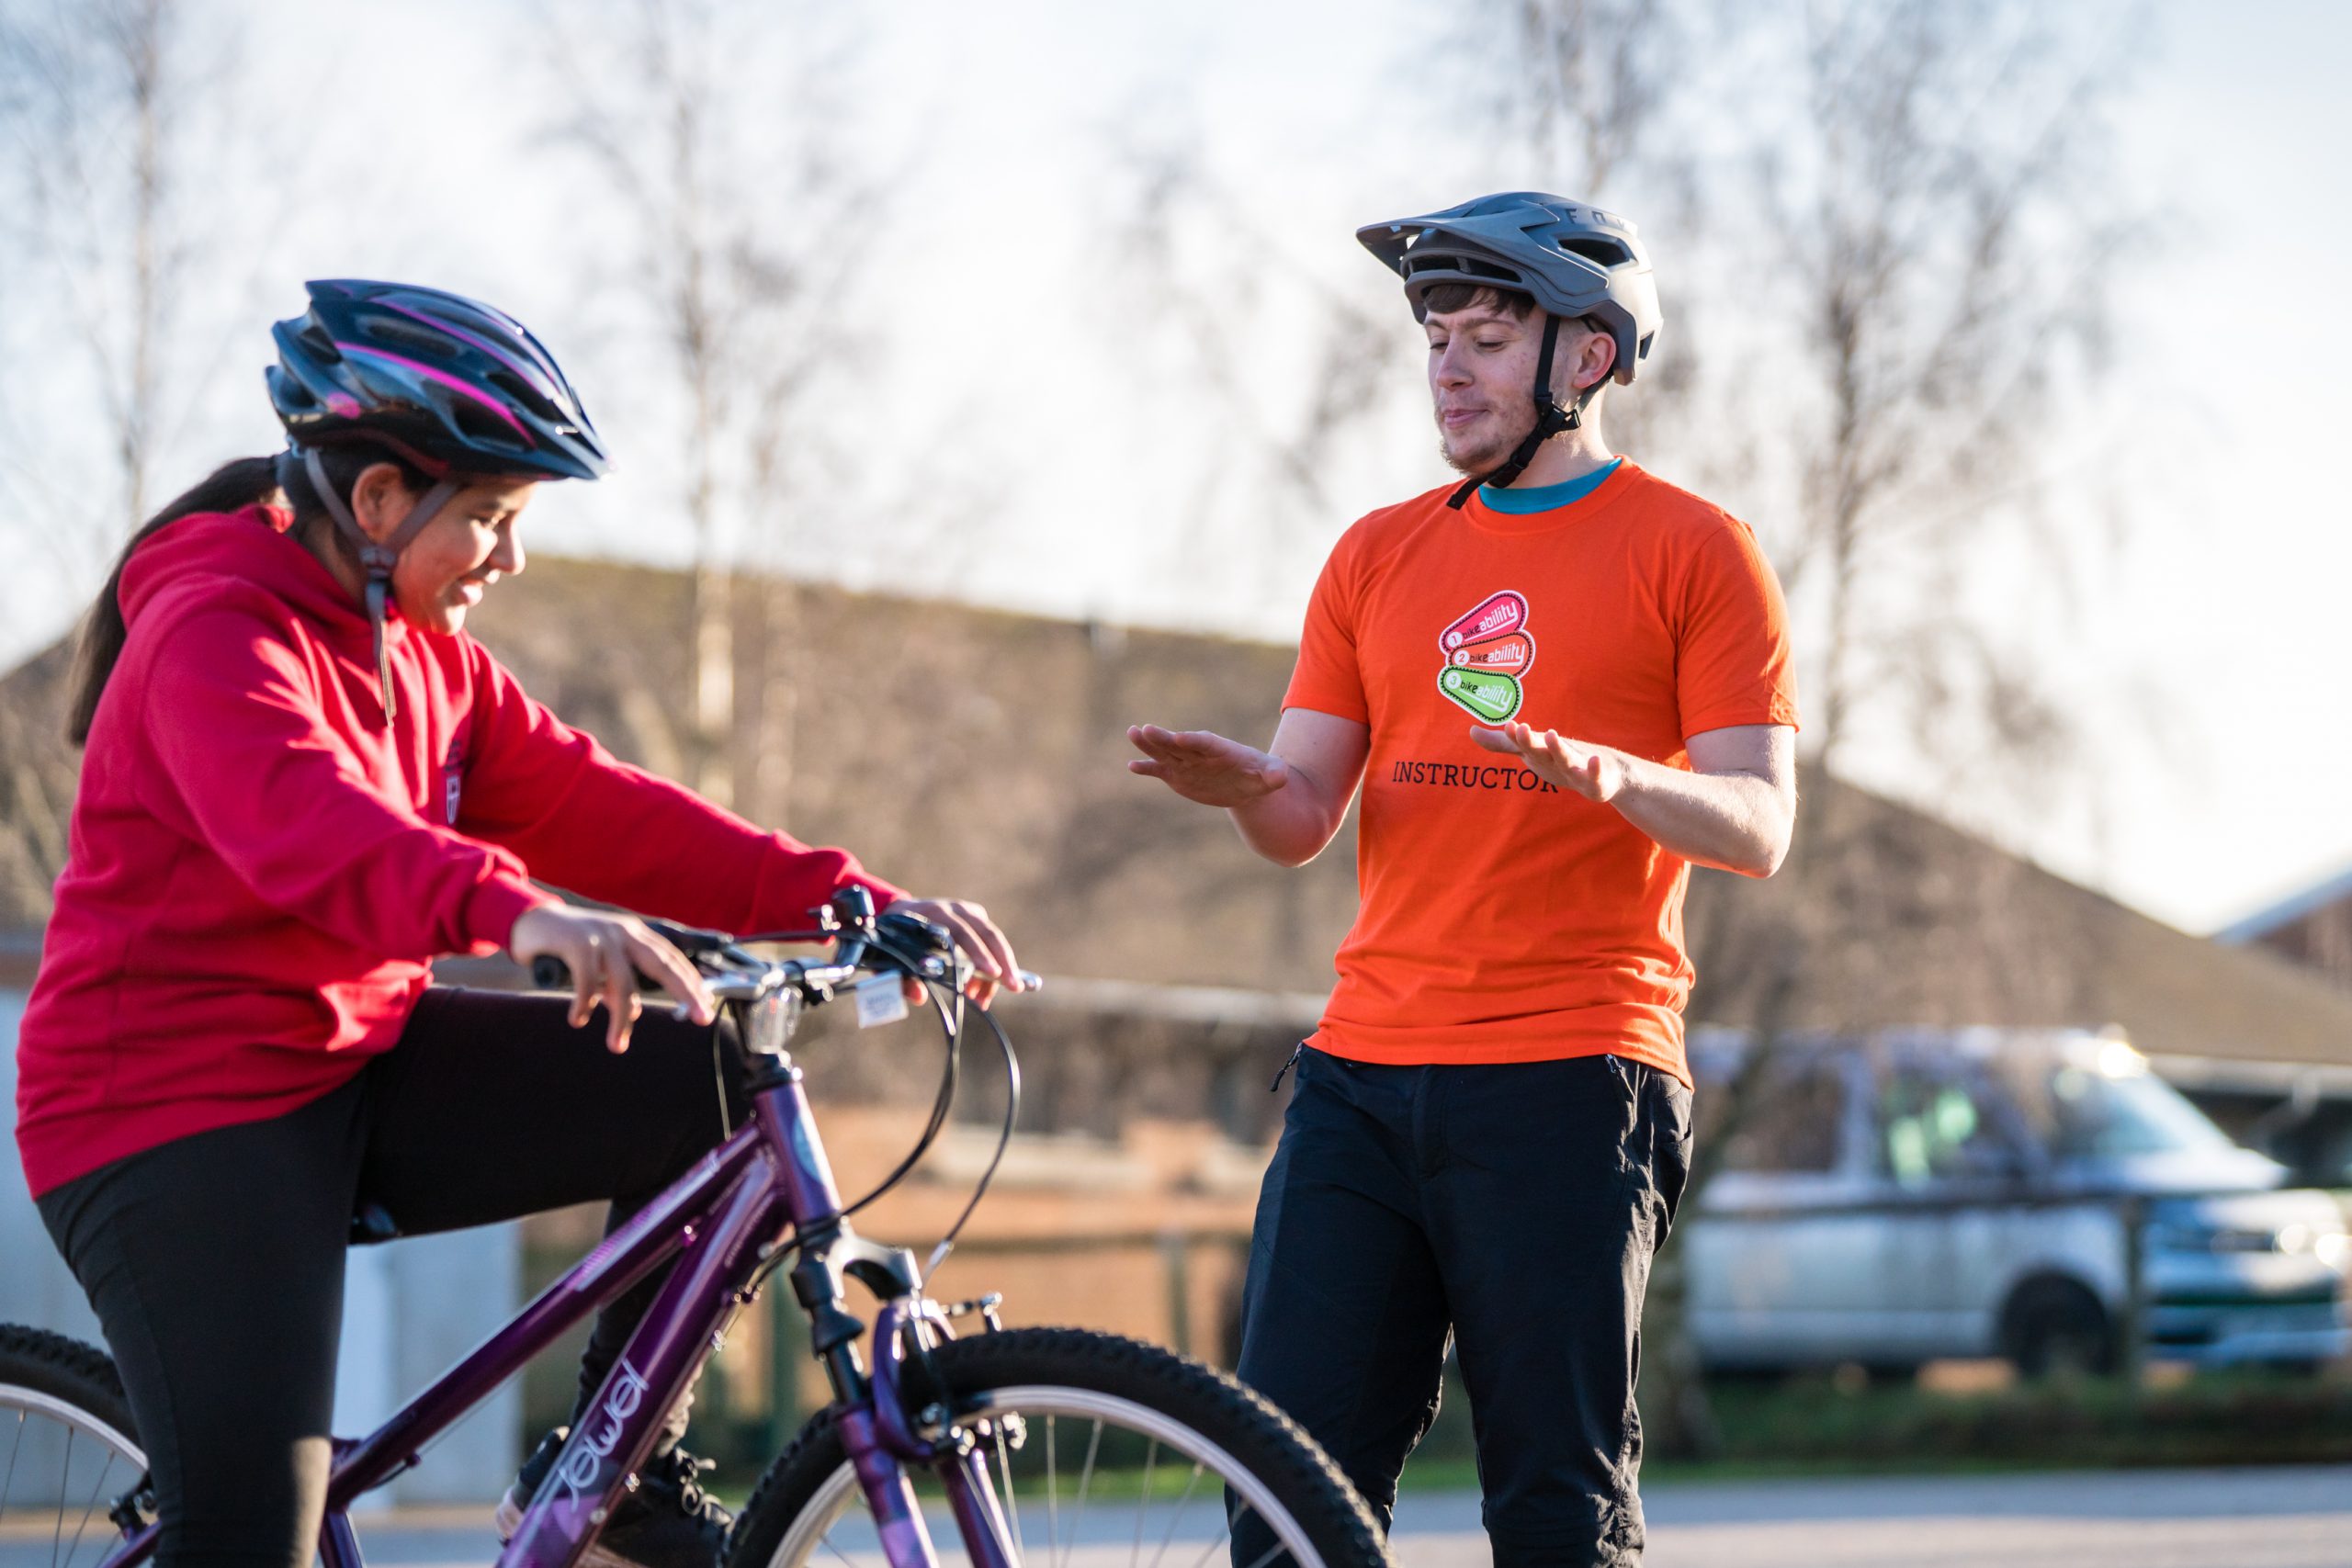 An instructor teaches a child during a Bikeability session